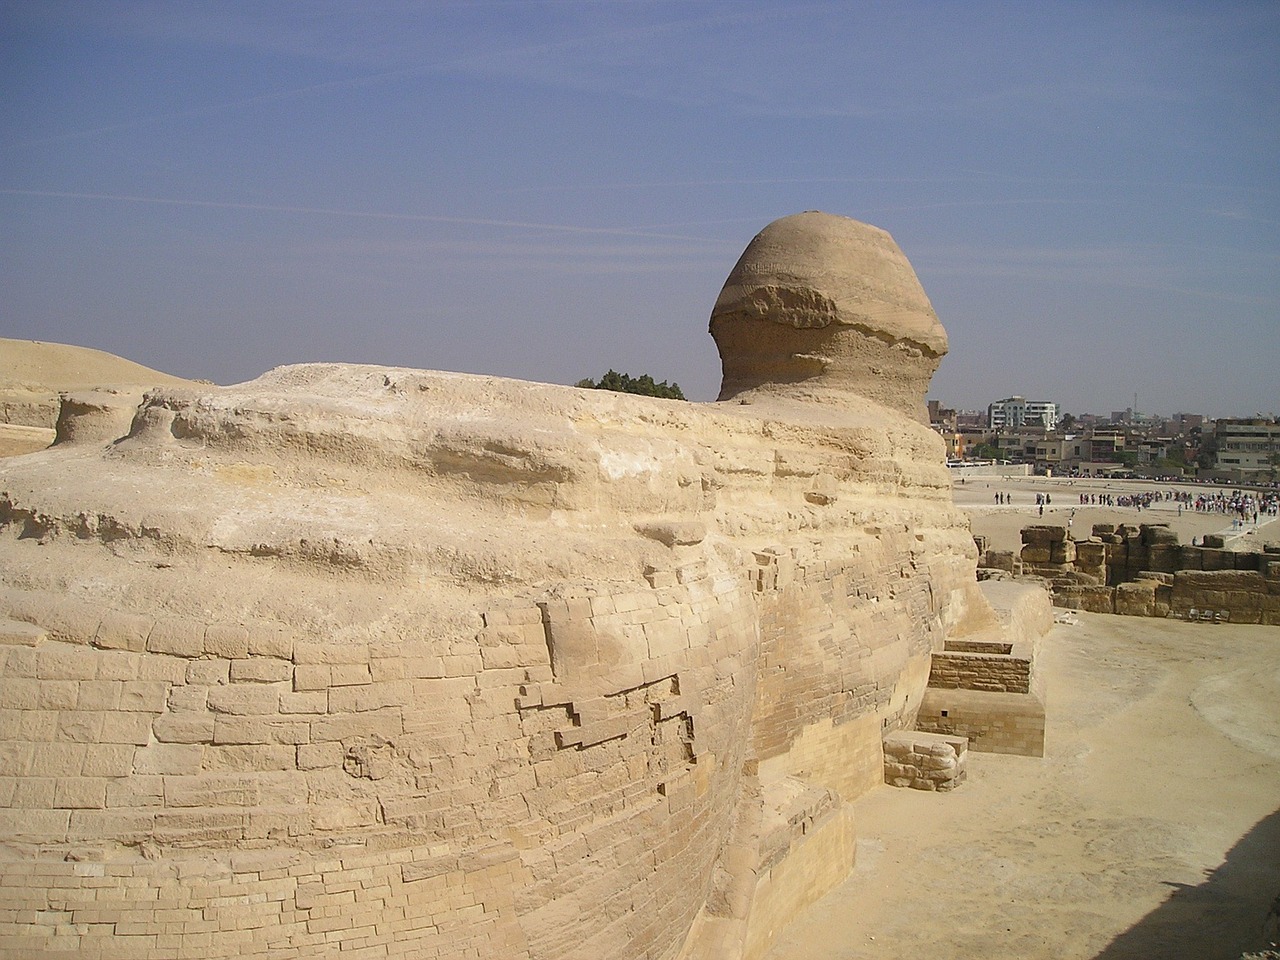 Visiting the sphinx